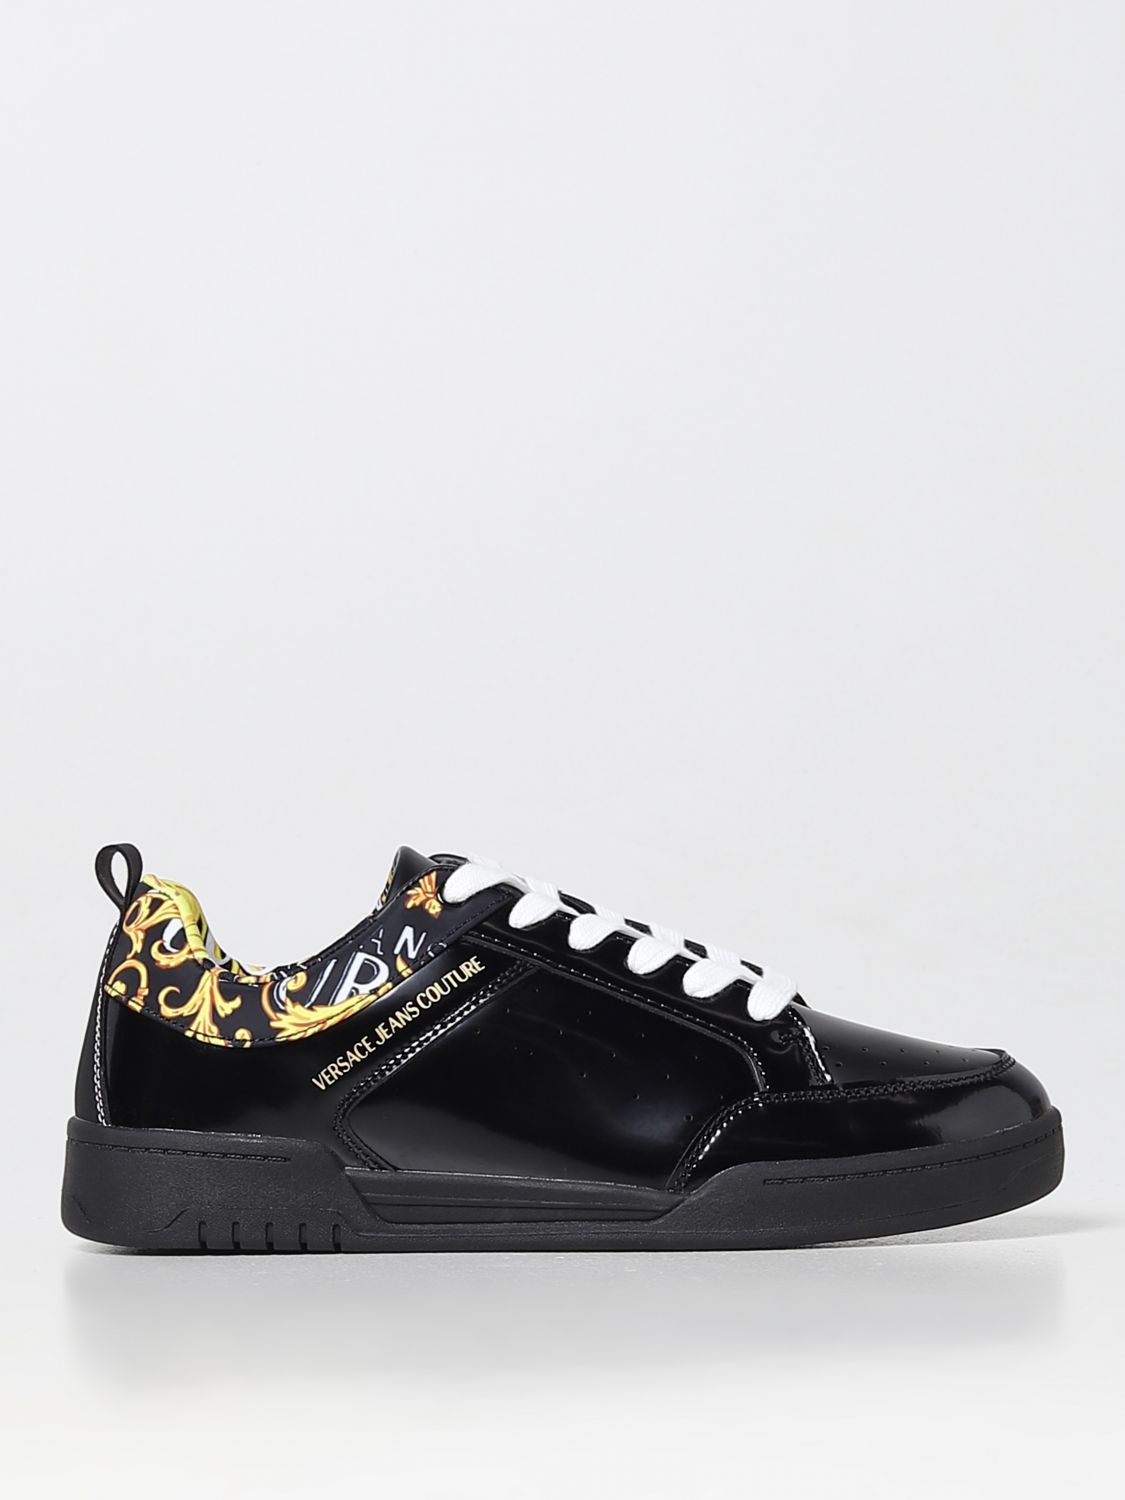 VERSACE COUTURE: Brooklyn sneakers in leather - Black | Versace Couture sneakers 74YA3SD6ZP219 online at GIGLIO.COM